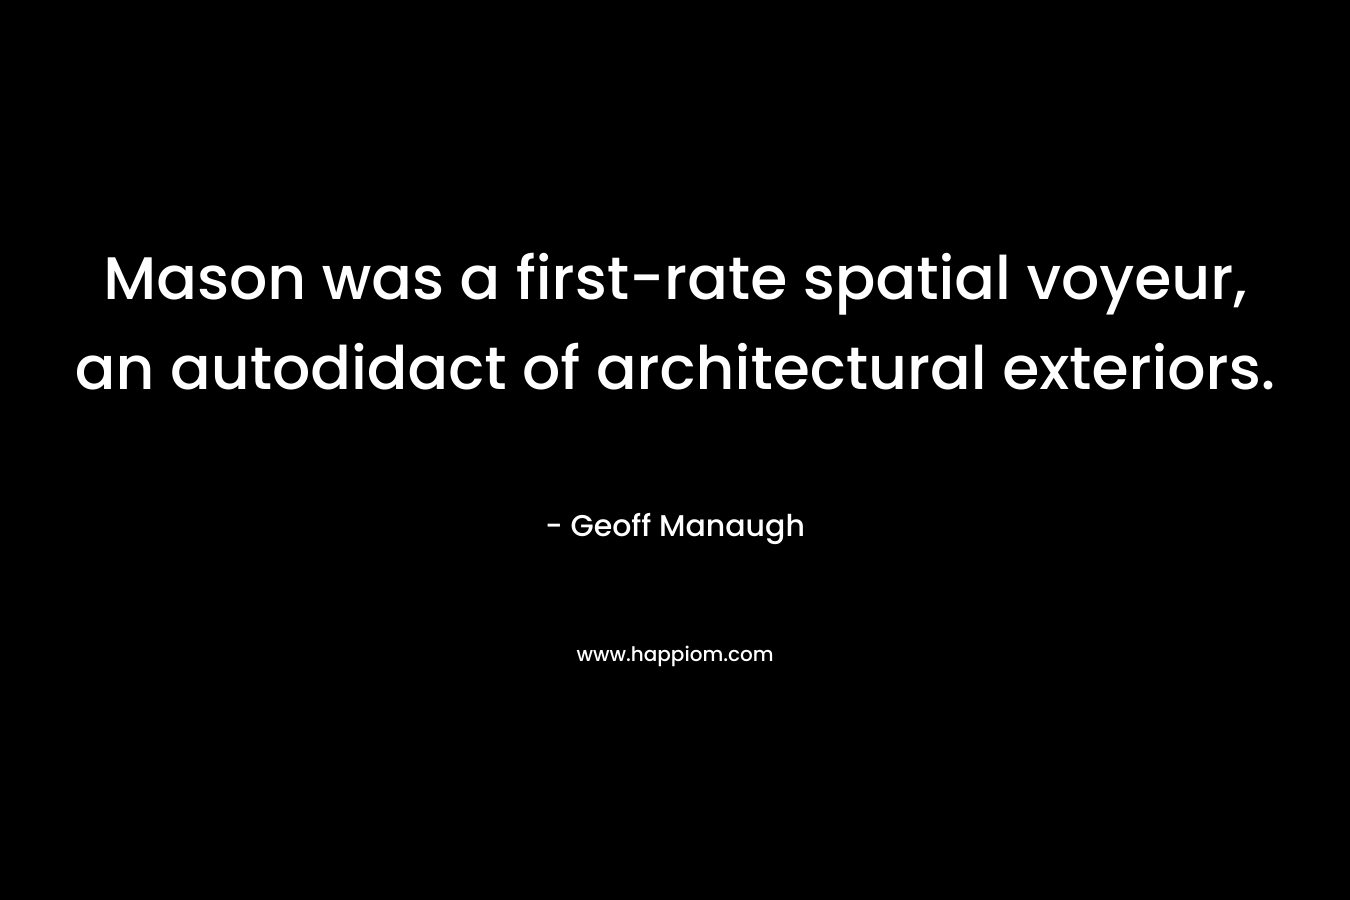 Mason was a first-rate spatial voyeur, an autodidact of architectural exteriors. – Geoff Manaugh